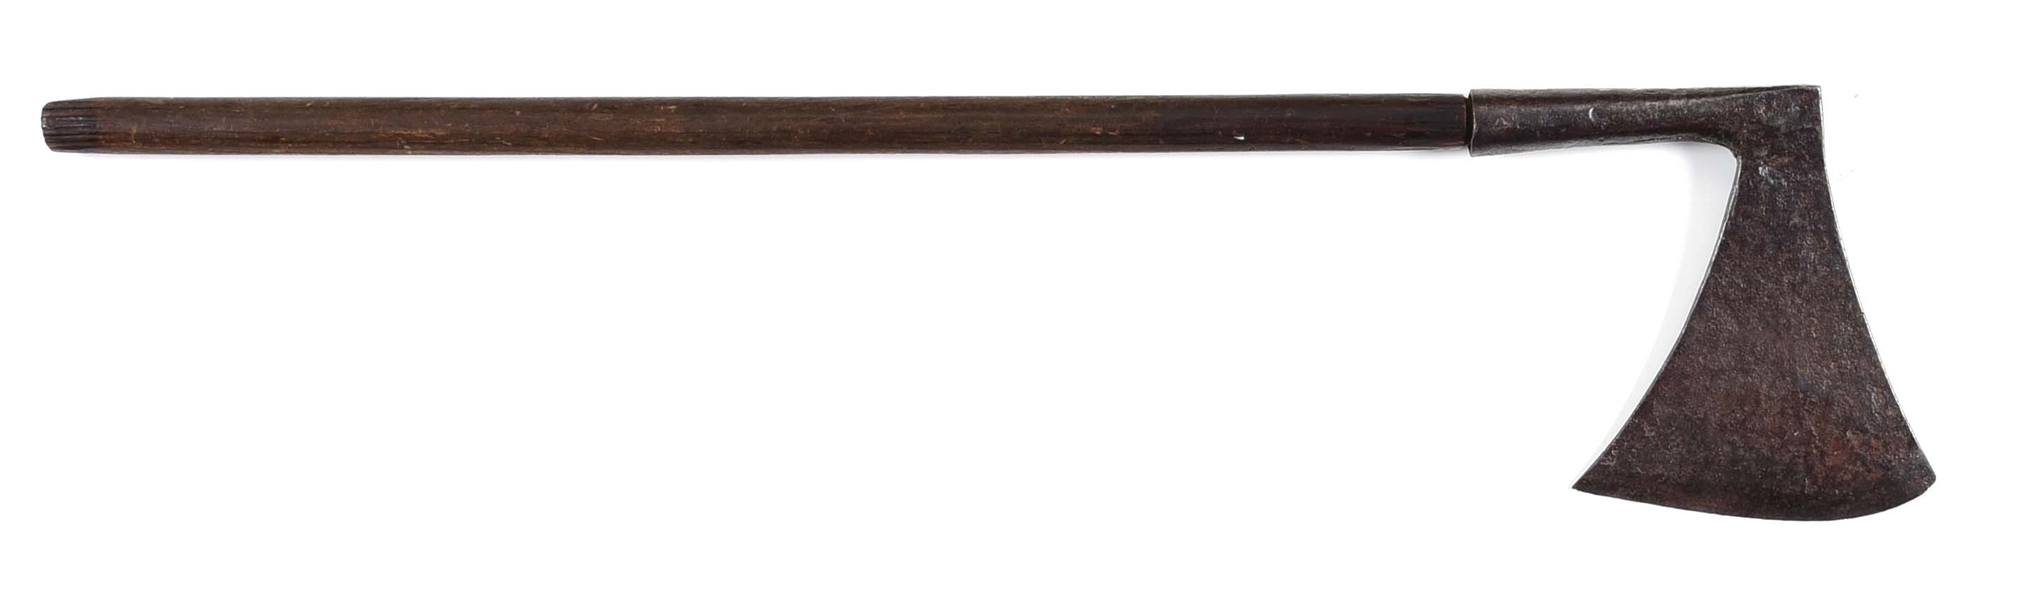 GERMAN OR ENGLISH EXECUTIONERS AXE, CIRCA 16TH OR 17TH CENTURY.